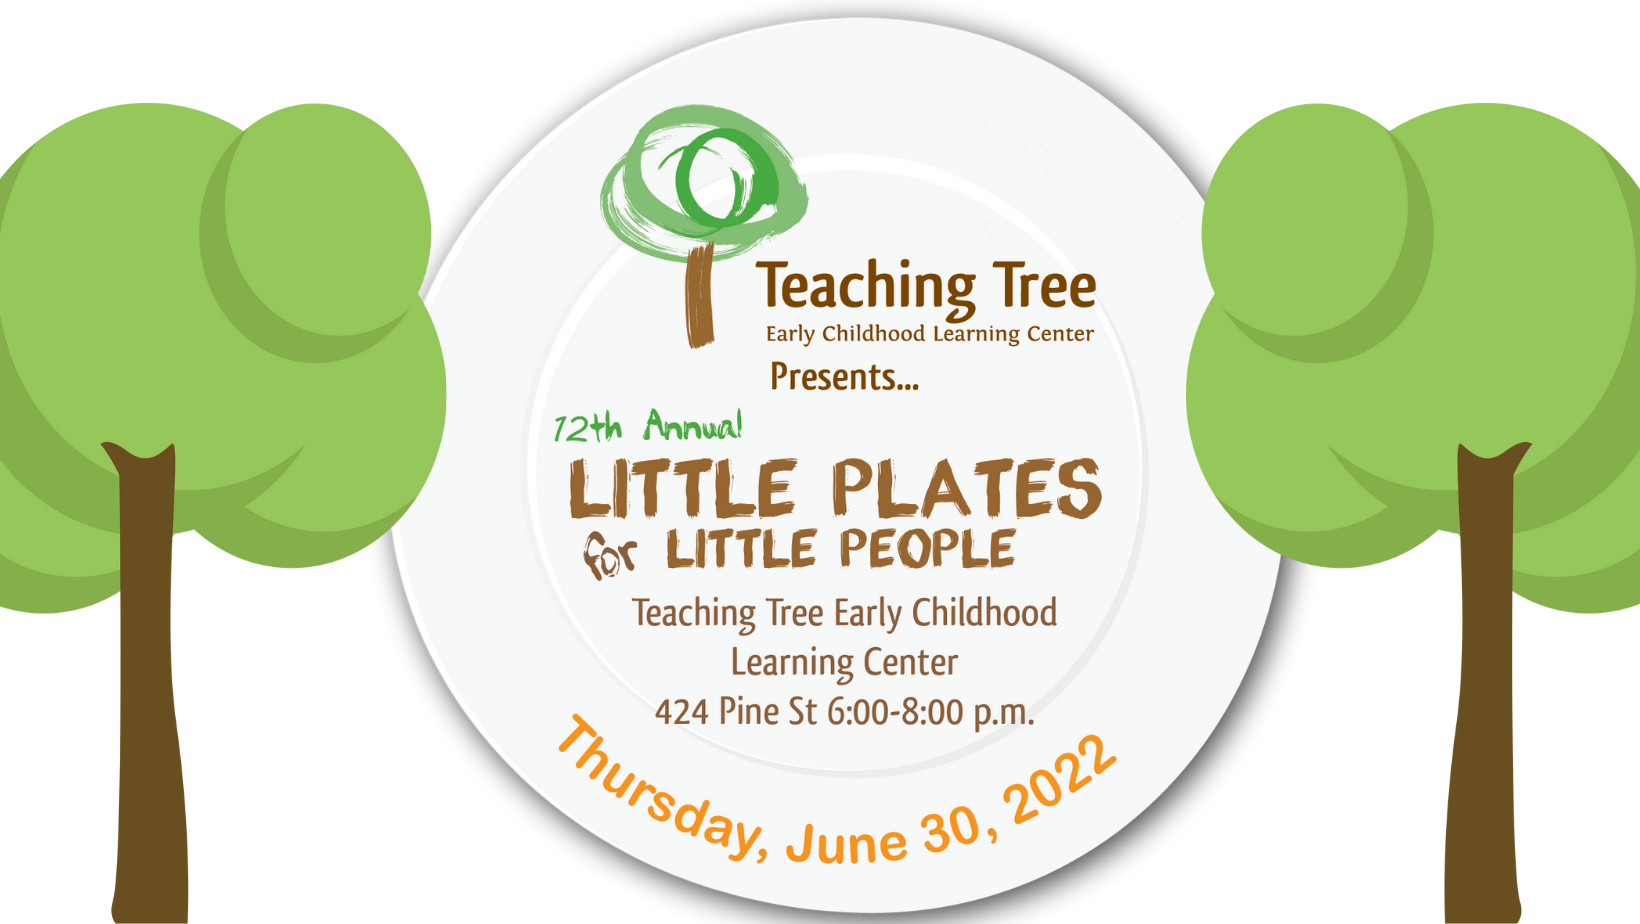 Little Plates for Little People